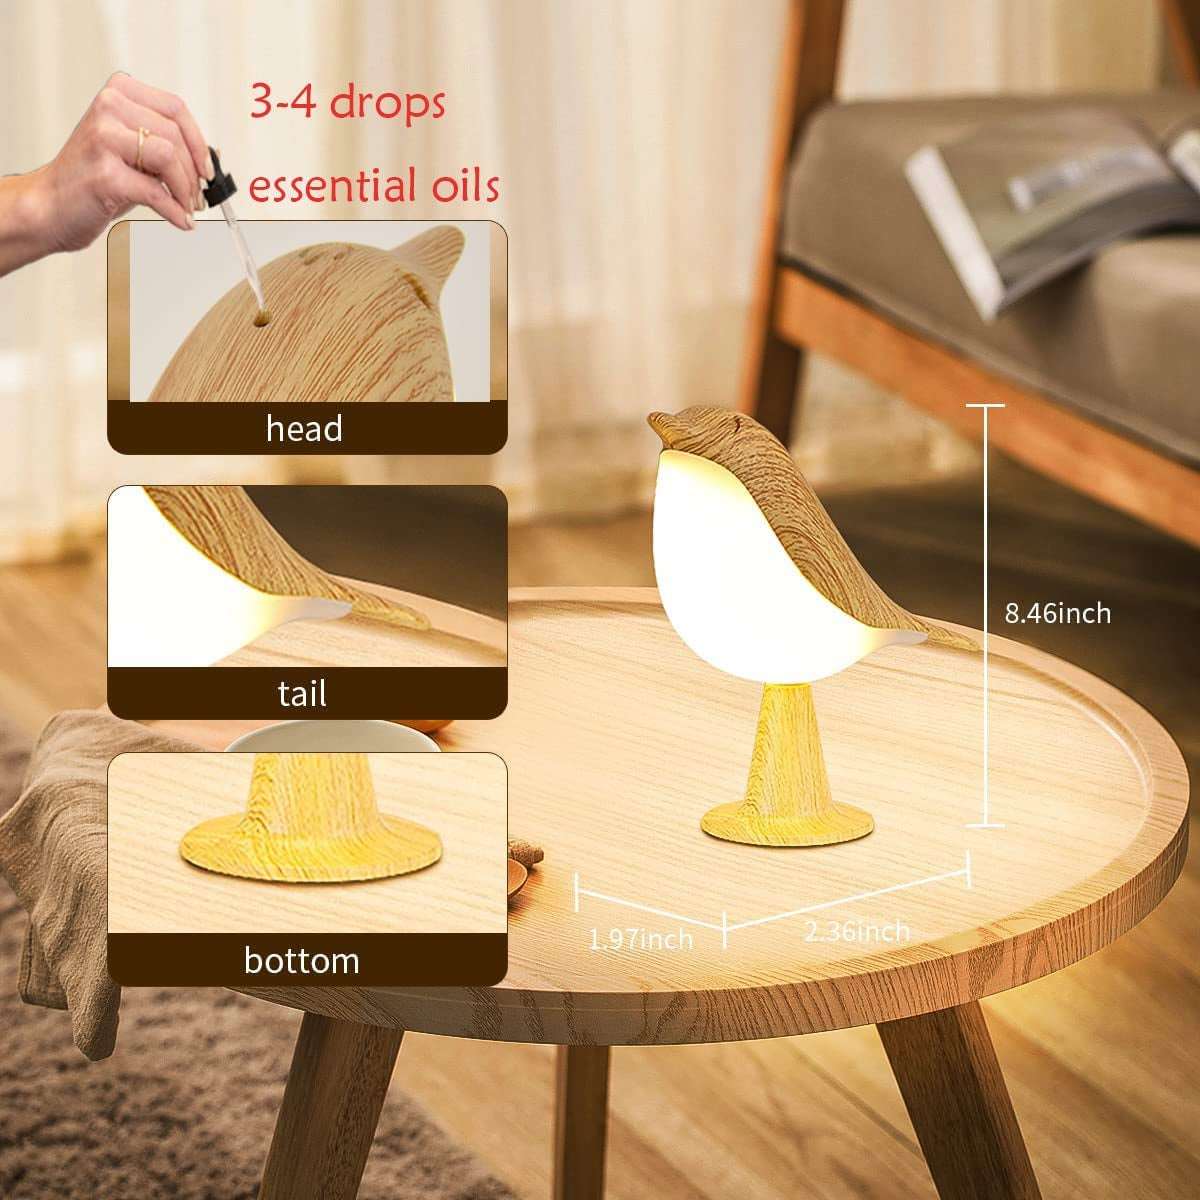 4U Small Cordless LED Table Lamp Touch Sensor, Bedside Lamp Night Light with Touch Dimmer,3 Level Brightness Nightstand Lamps, Rechargered Desk Lamp for Bedroom, Home, Office, College Dorm Room